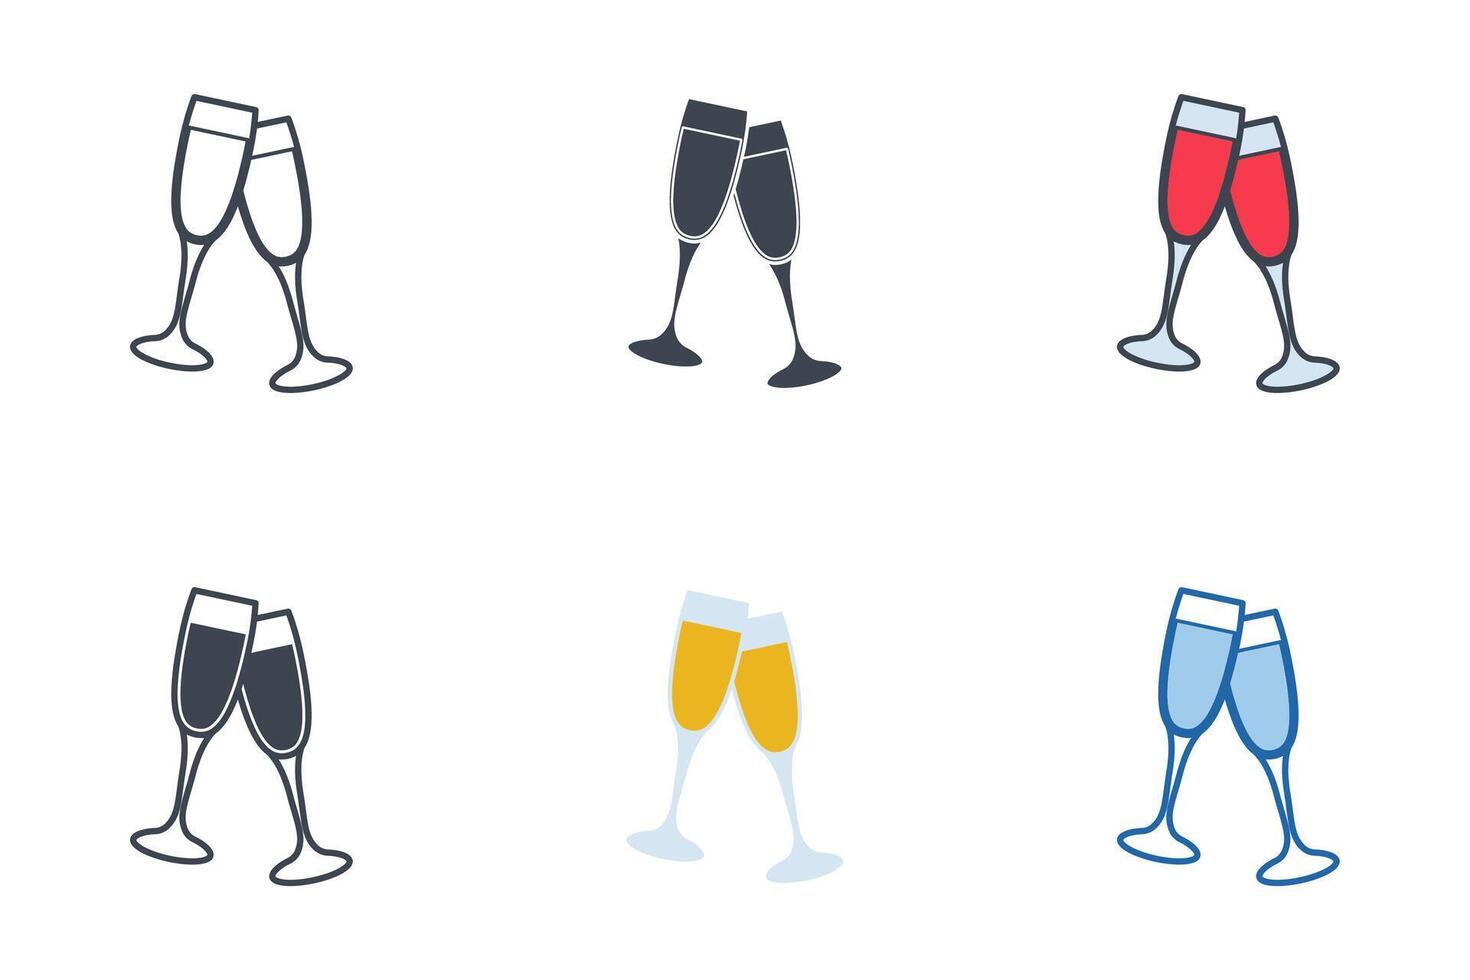 Cheers champagne glasses icons with different styles. Clinking glasses with champagne symbol vector illustration isolated on white background